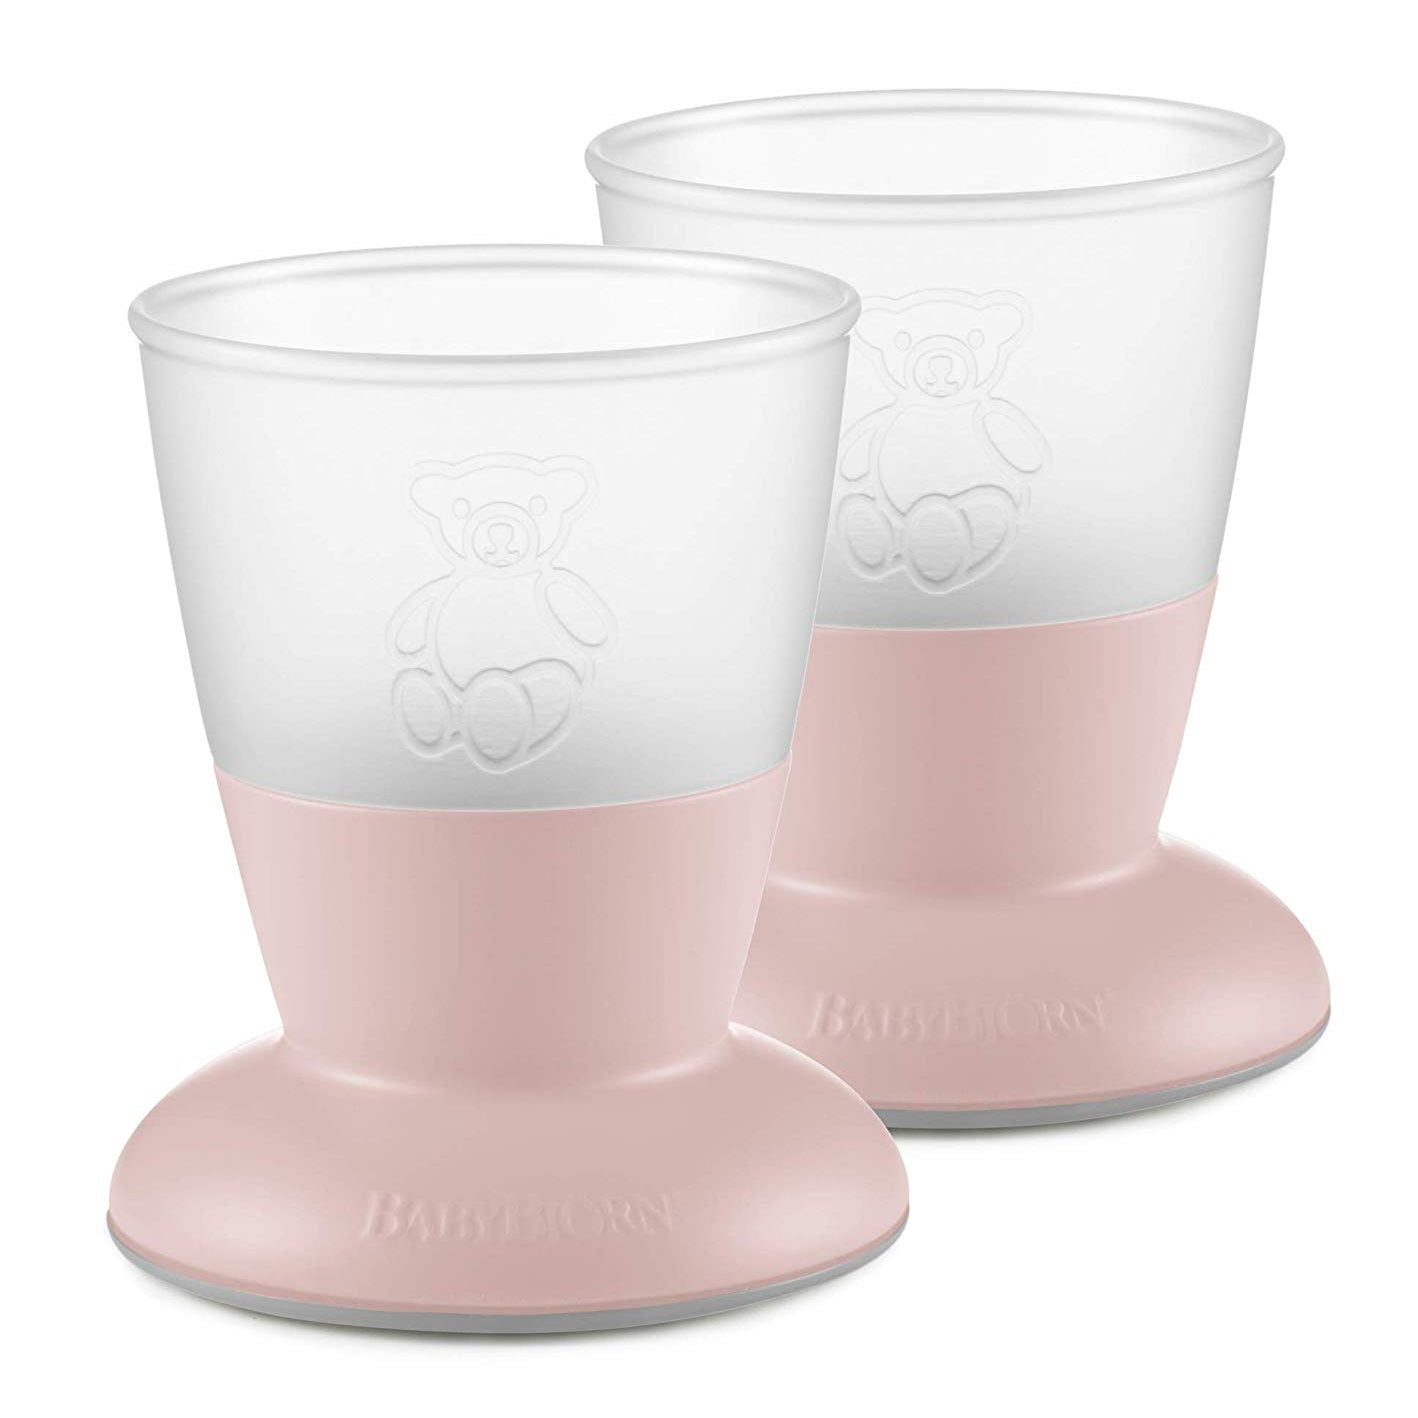 Baby Cup - 2 Pack powder pink